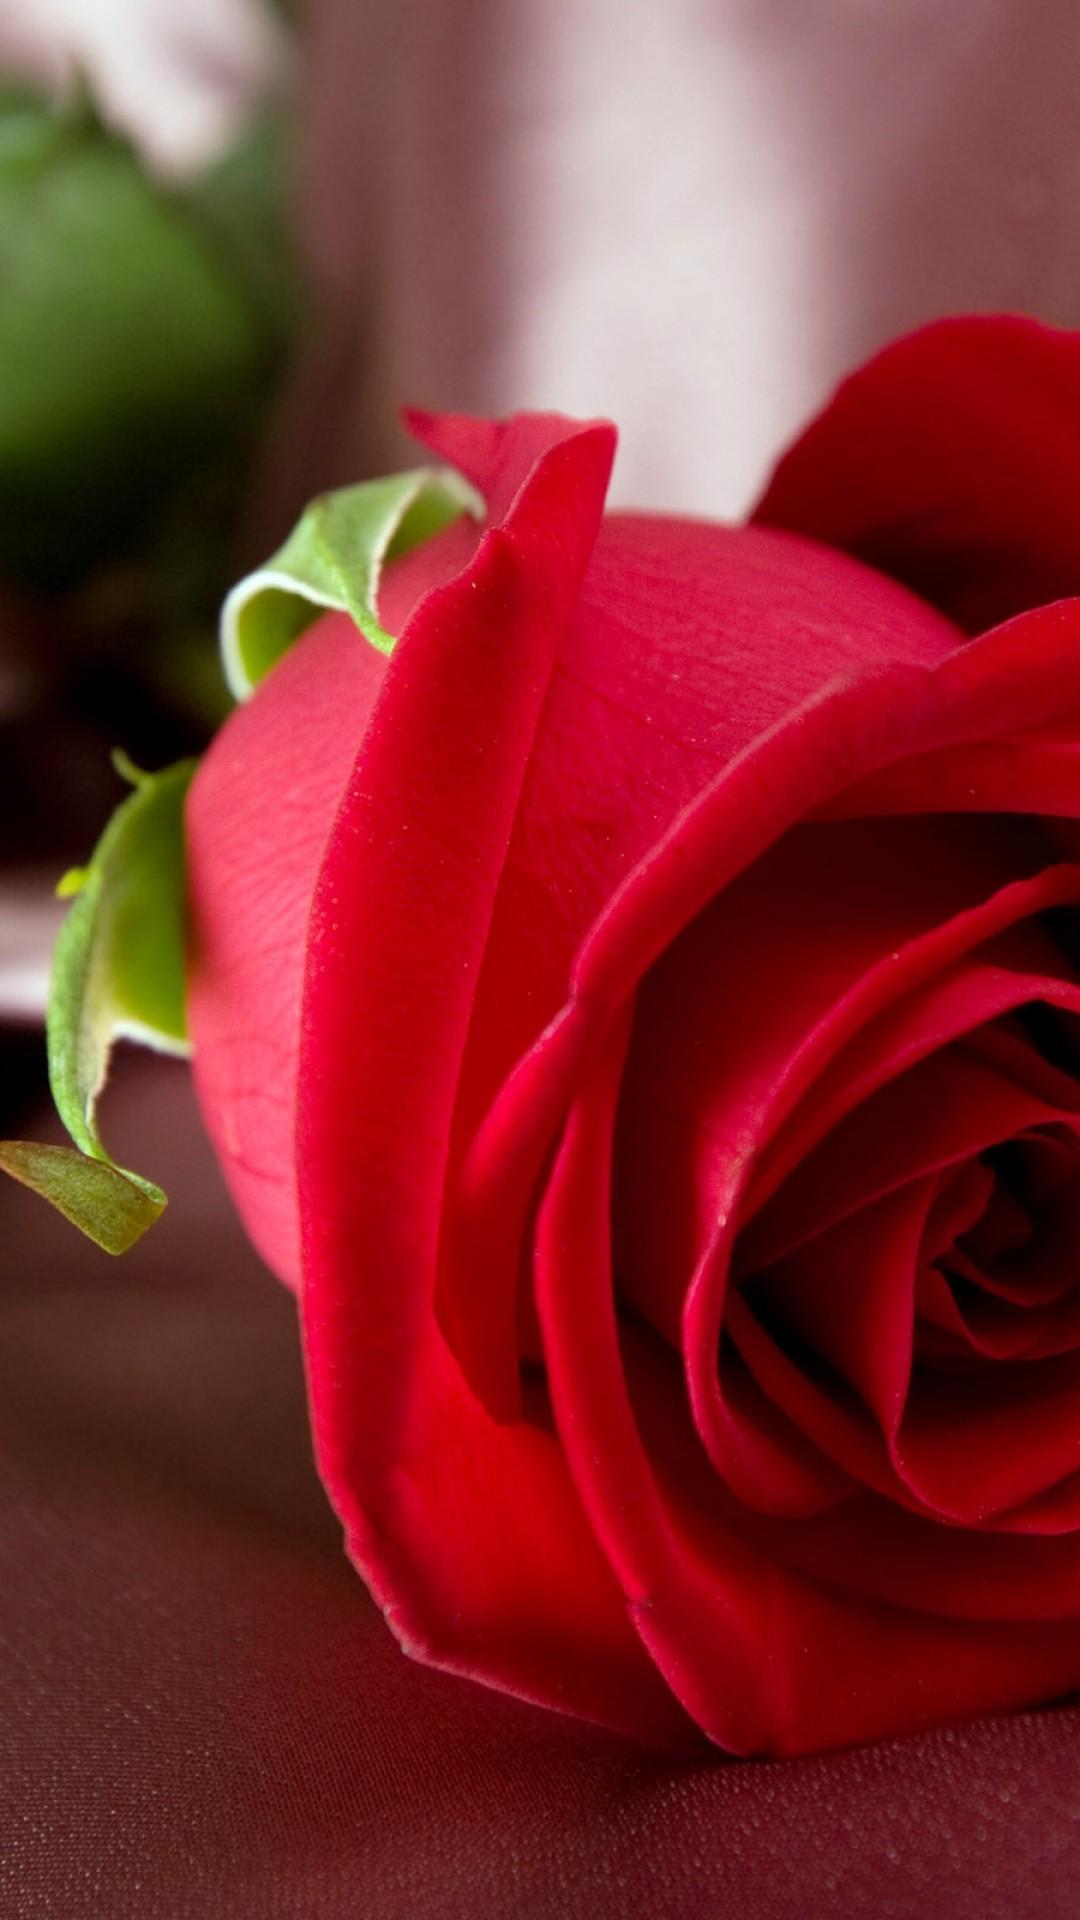 Beautiful Red Roses Hd Wallpapers For Mobile